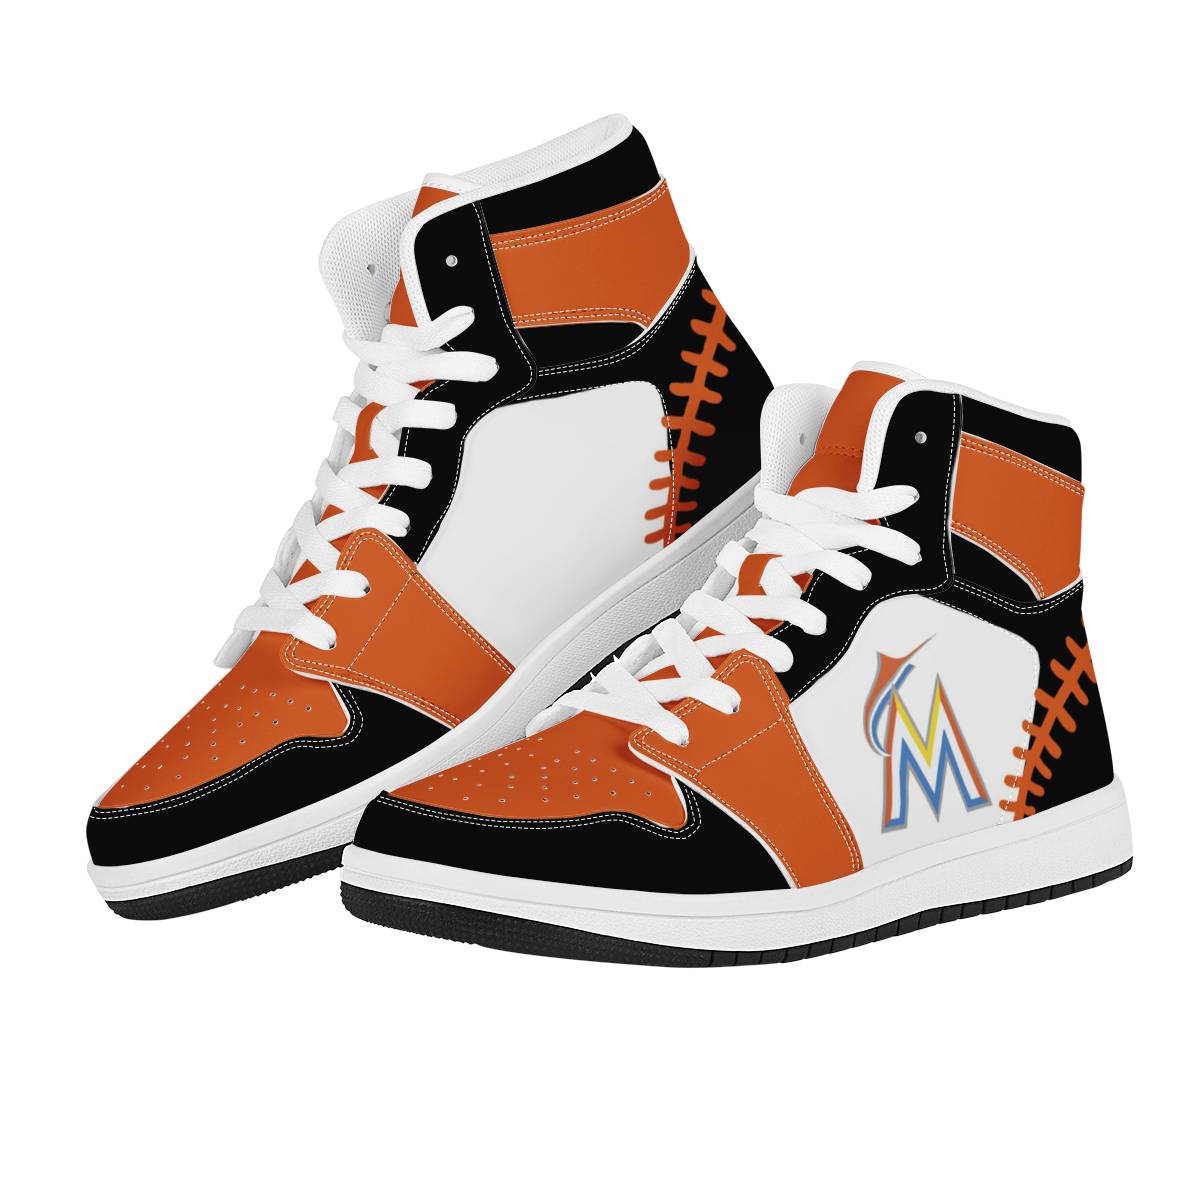 Men's Miami Marlins High Top Leather AJ1 Sneakers 001